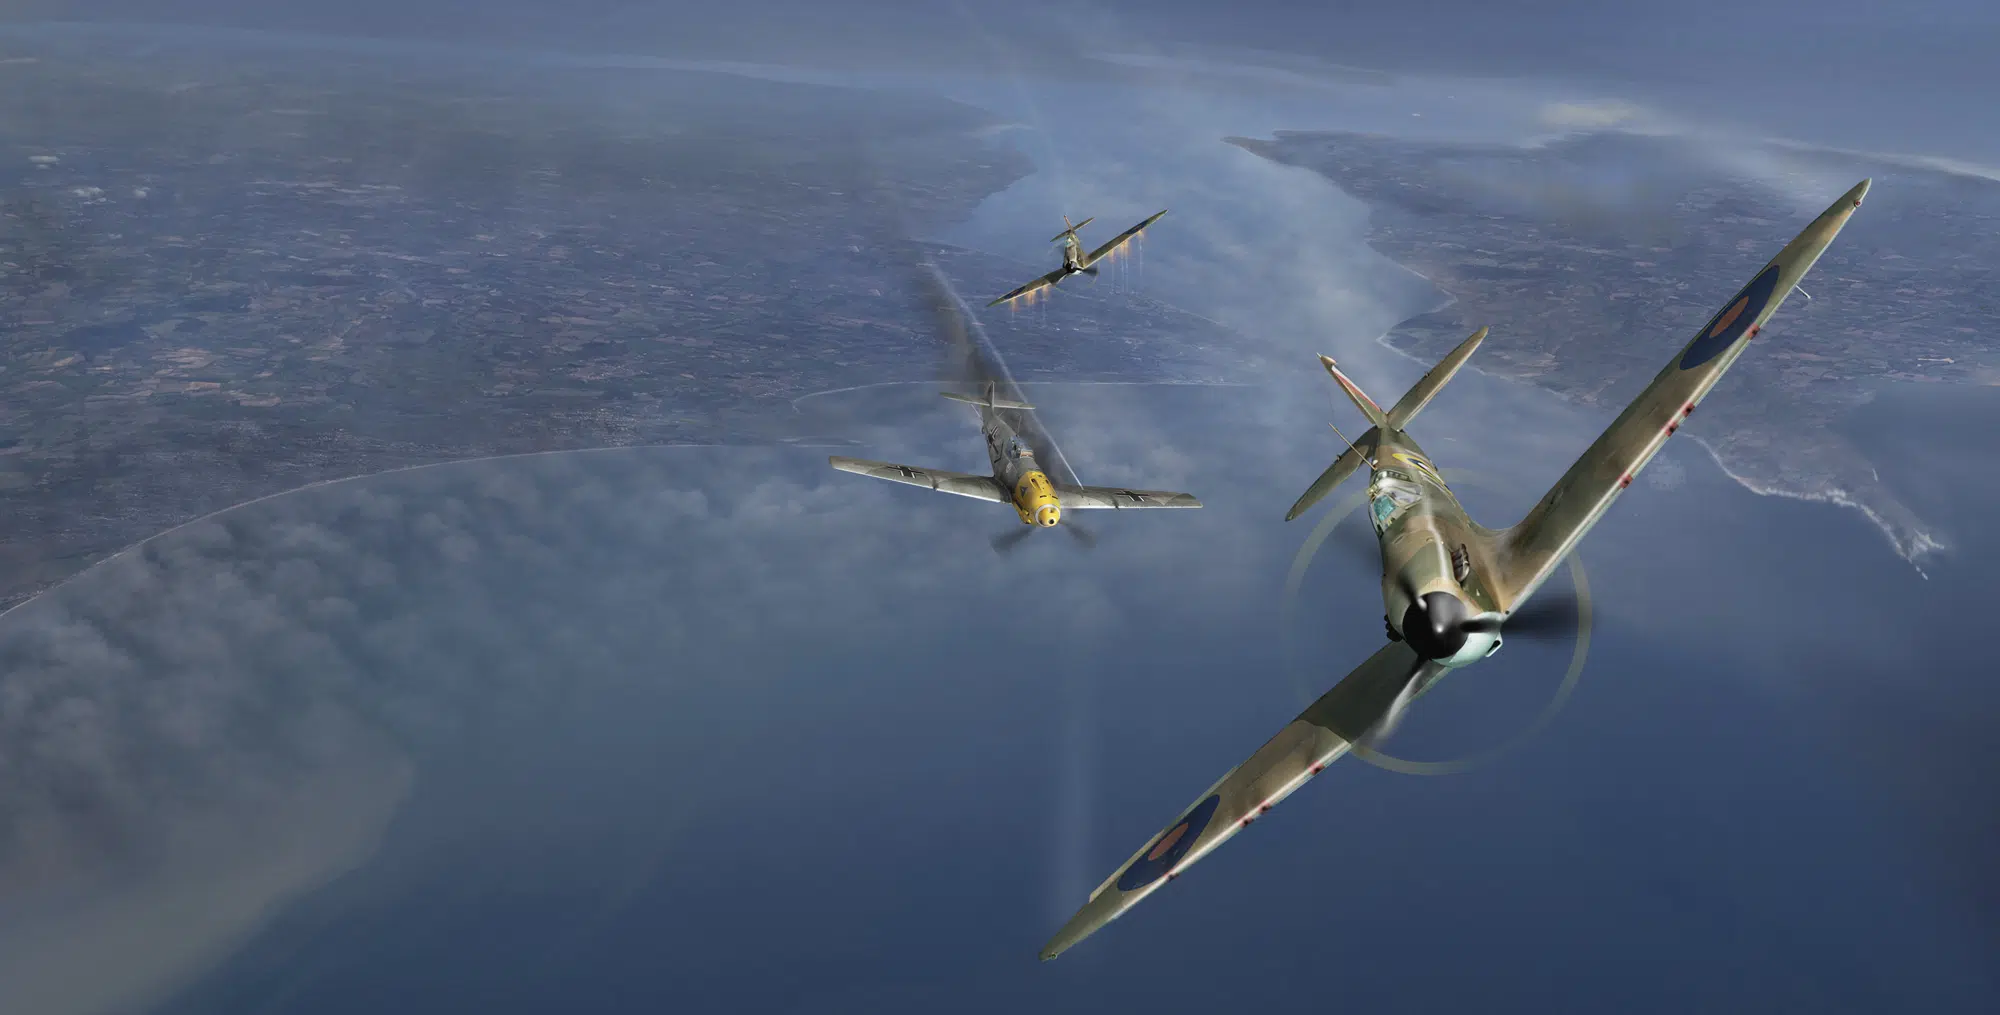 Dogfight over the Isle of Wight